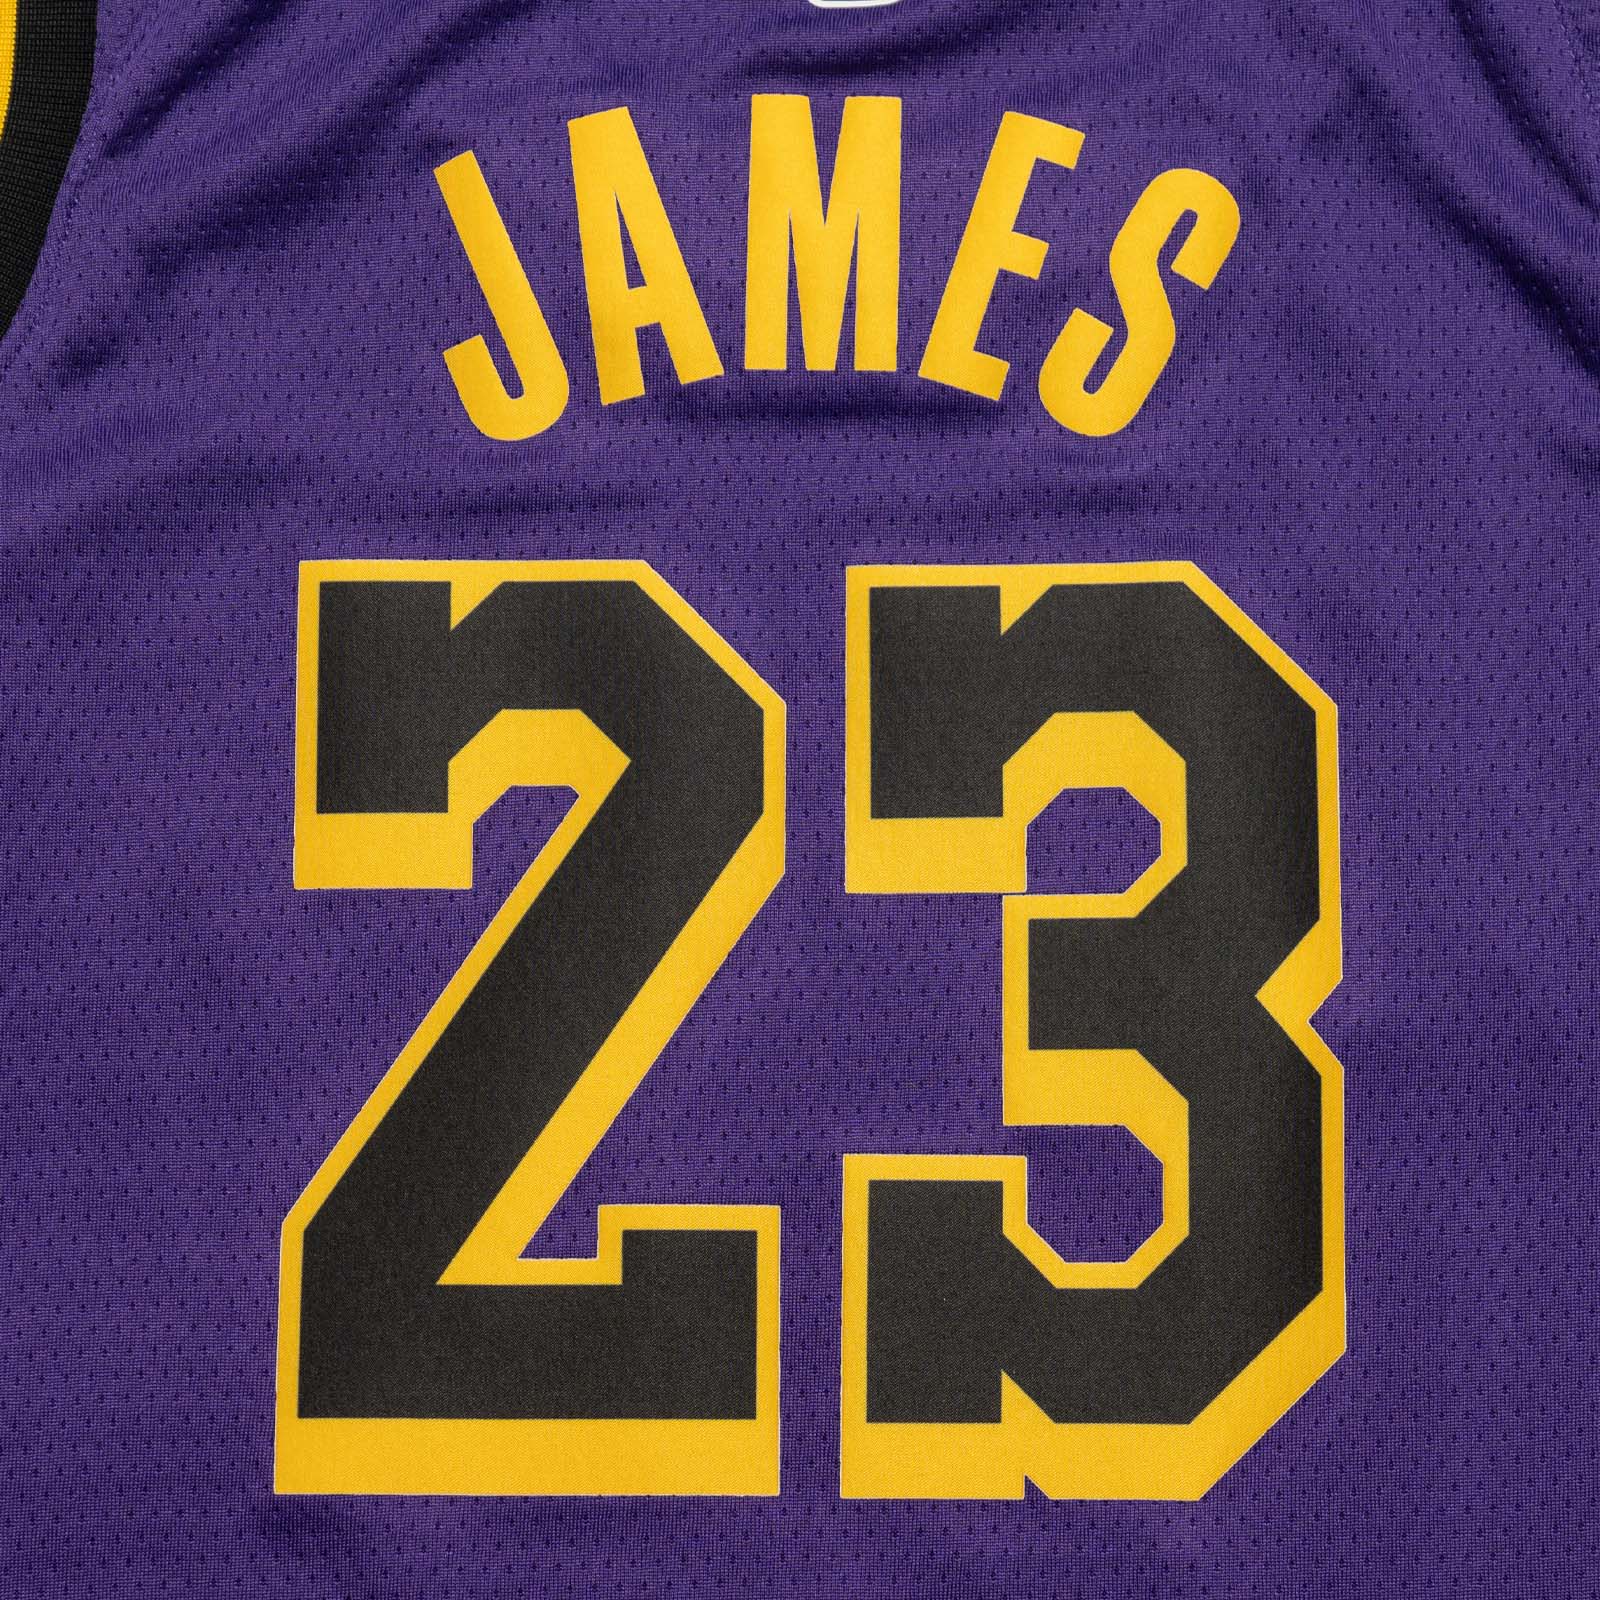 LeBron James Los Angeles Lakers 2022/23 Classic Edition Swingman Jerse -  Throwback